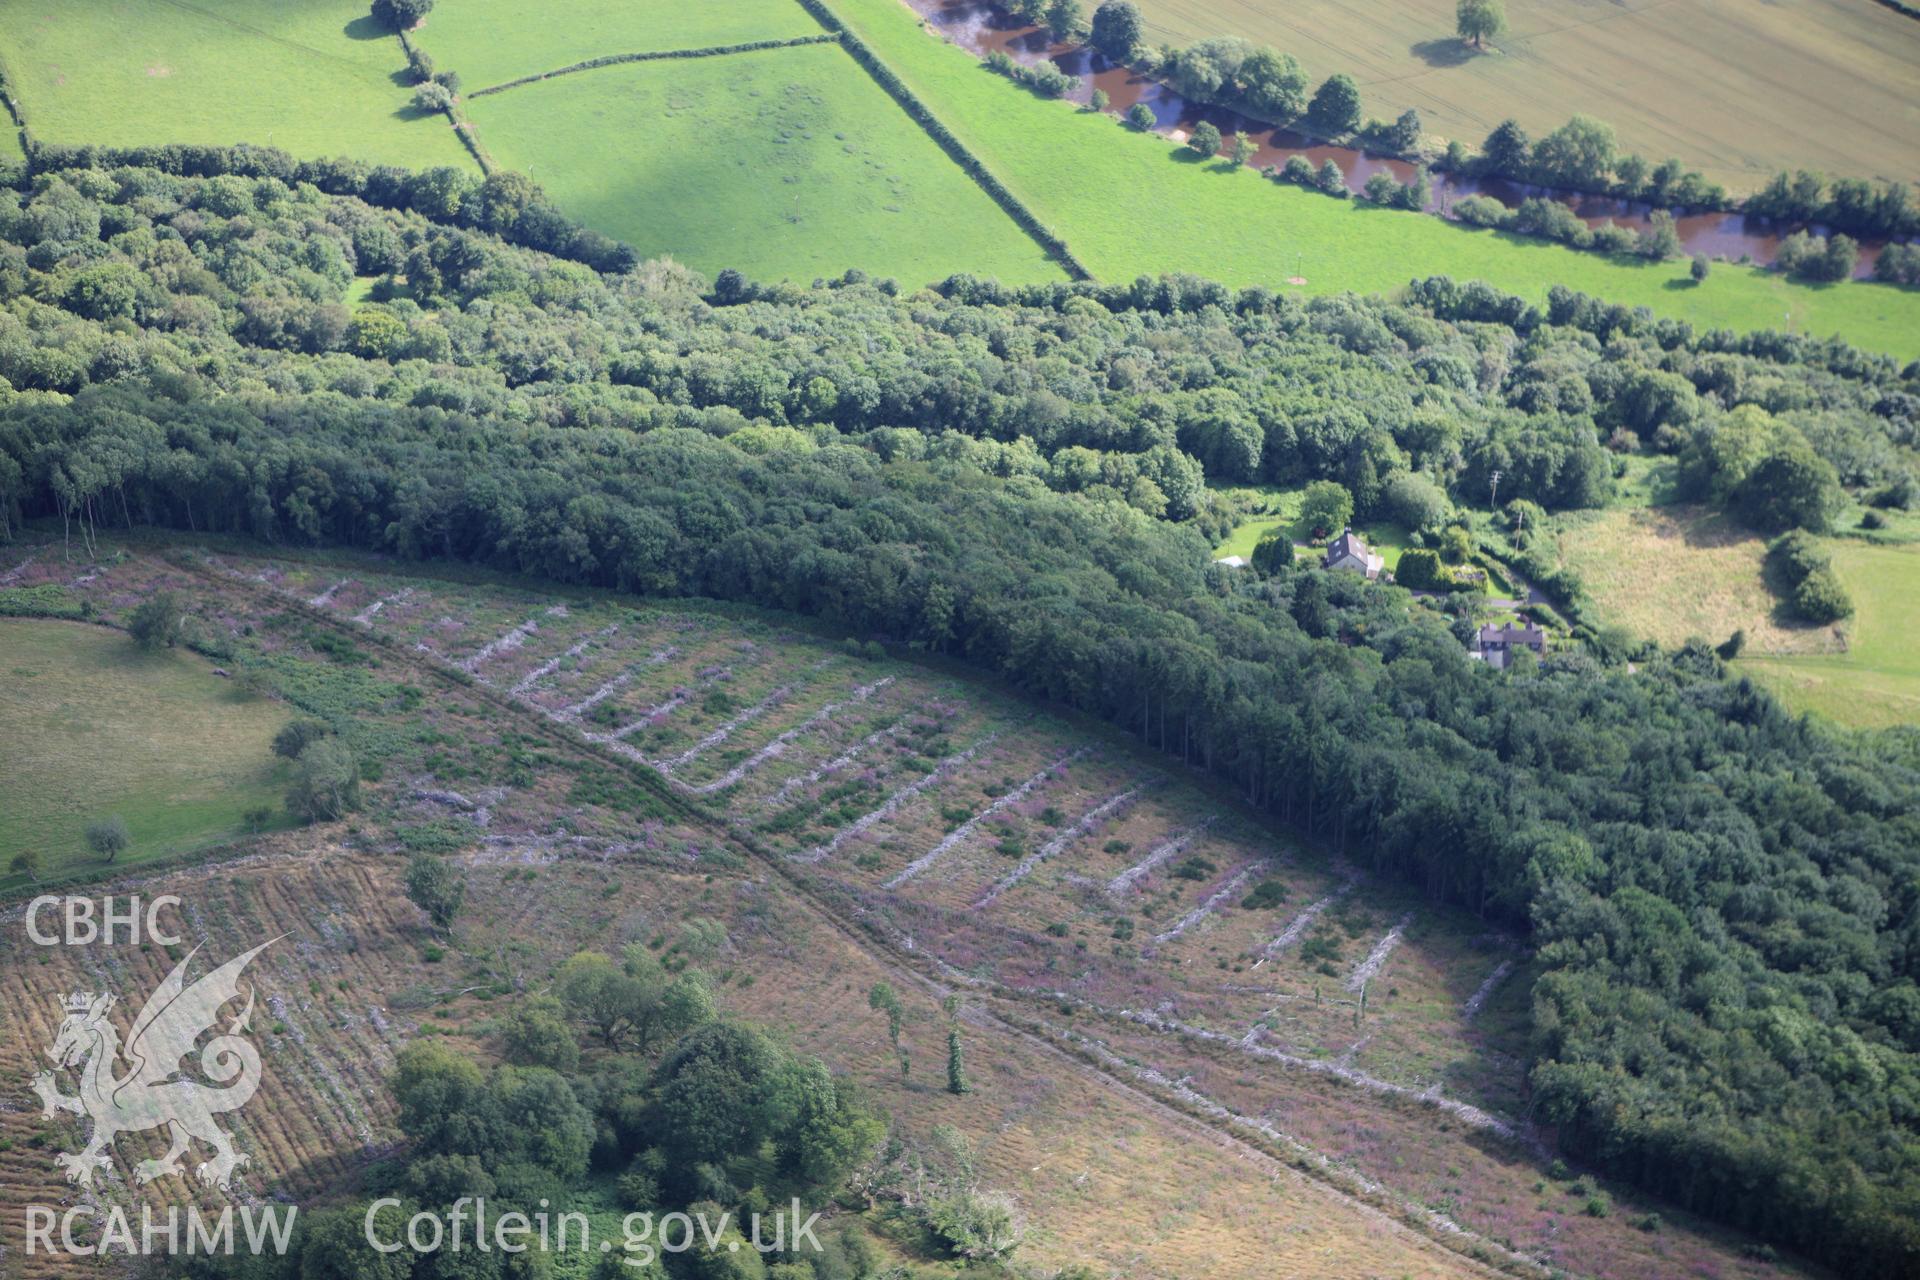 RCAHMW colour oblique aerial photograph of The Graig Settlement. Taken on 23 July 2009 by Toby Driver